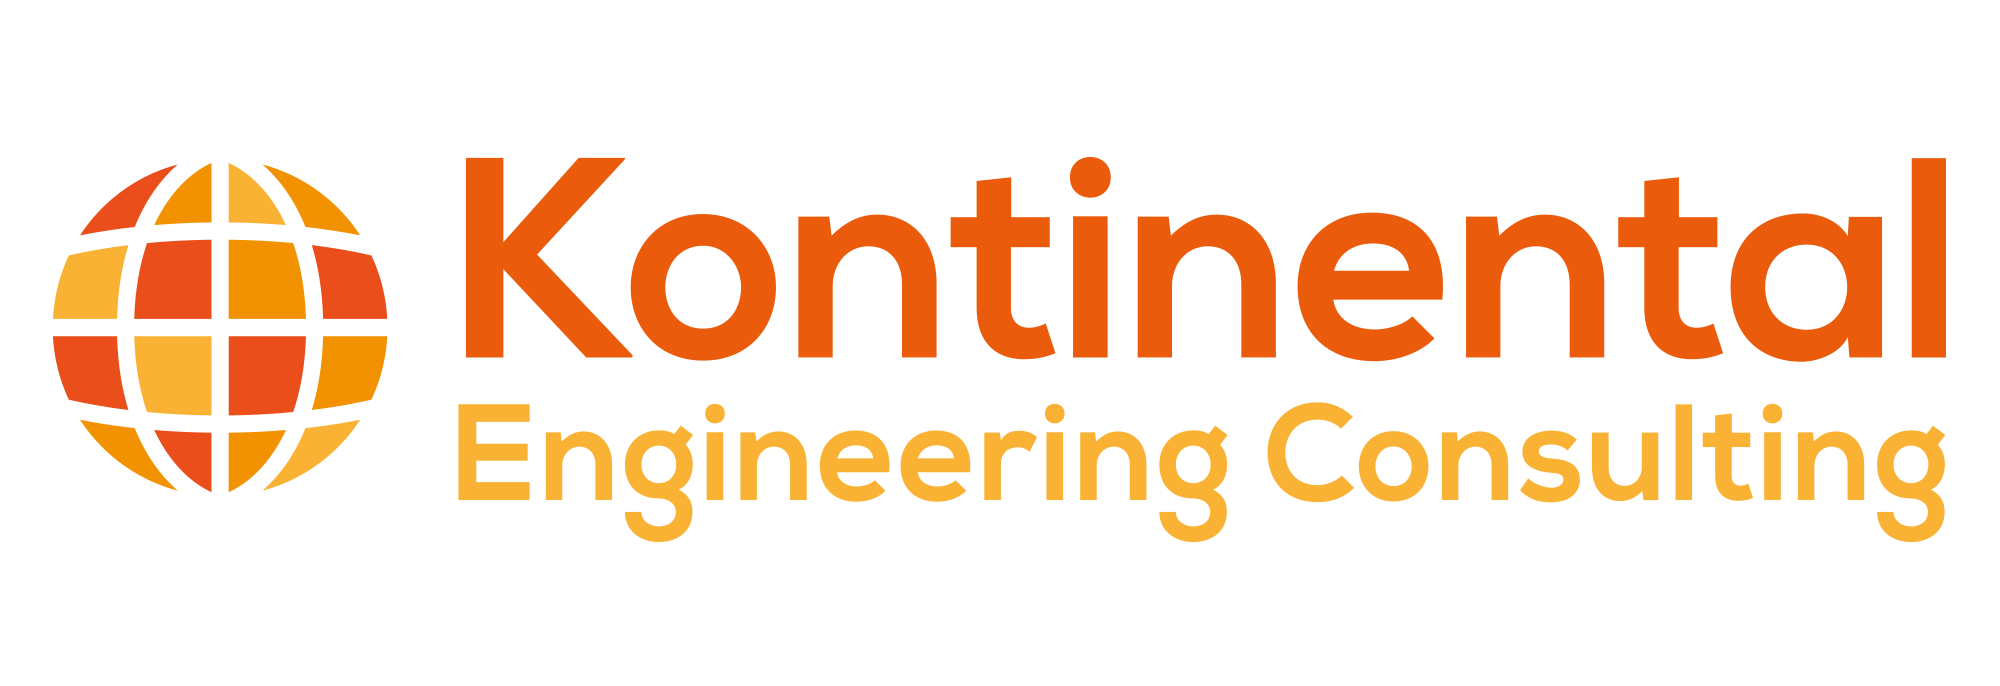 Kontinental Engineering Consulting